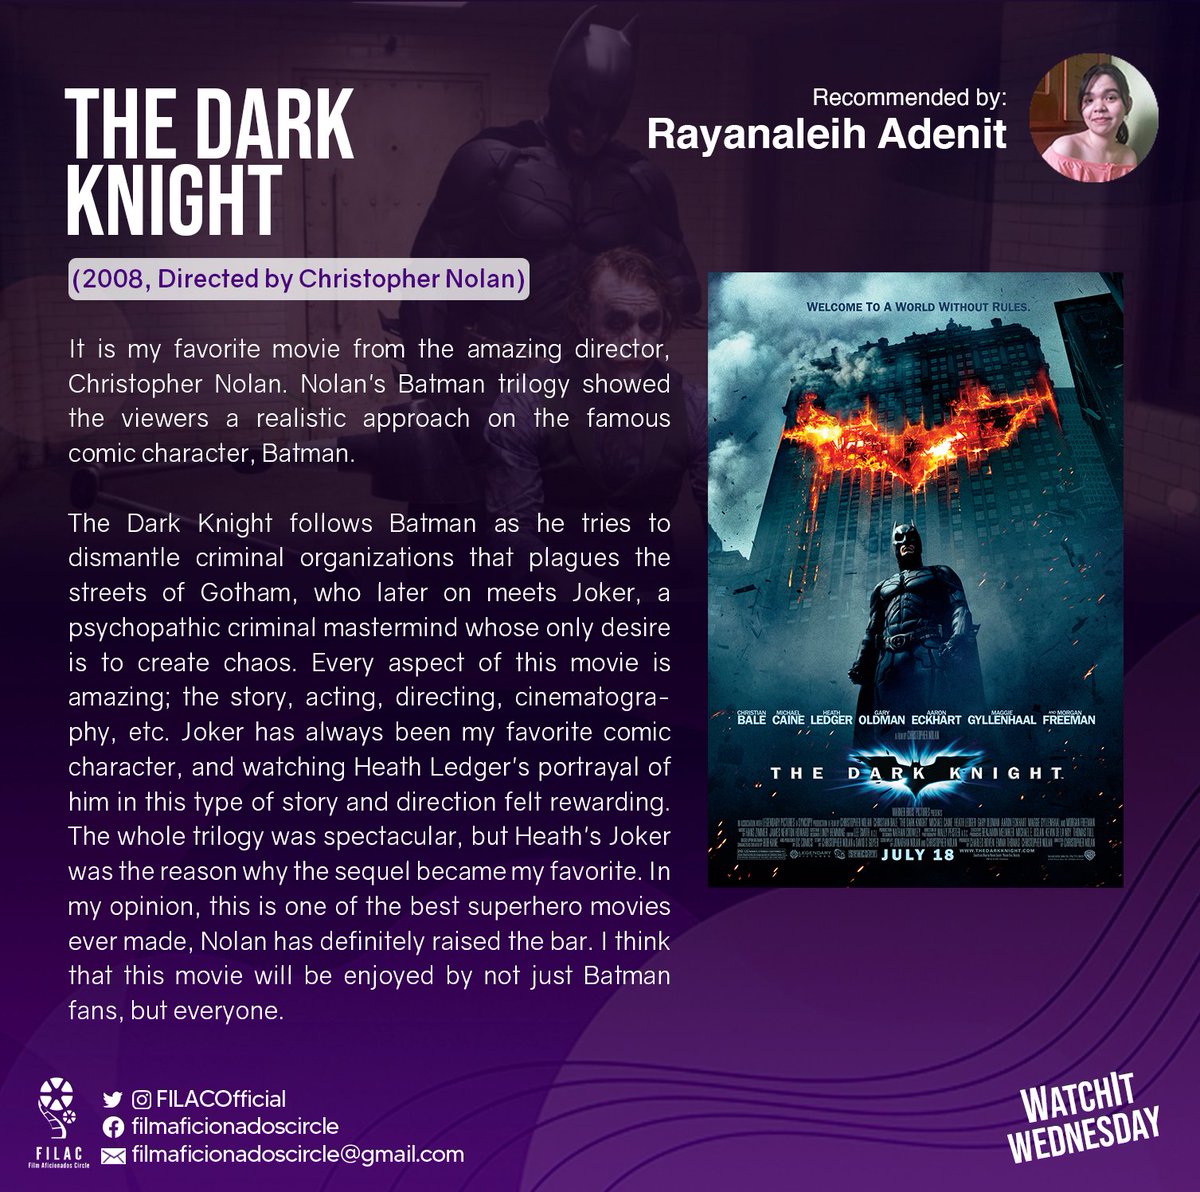 'Sometimes the truth isn't good enough, sometimes people deserve more. Sometimes people deserve to have their faith rewarded.'
- Bruce Wayne

It's #WatchItWednesday!

For our first movie, Rayanaleih Adenit recommends to watch The Dark Knight (2008) directed by Christopher Nolan.